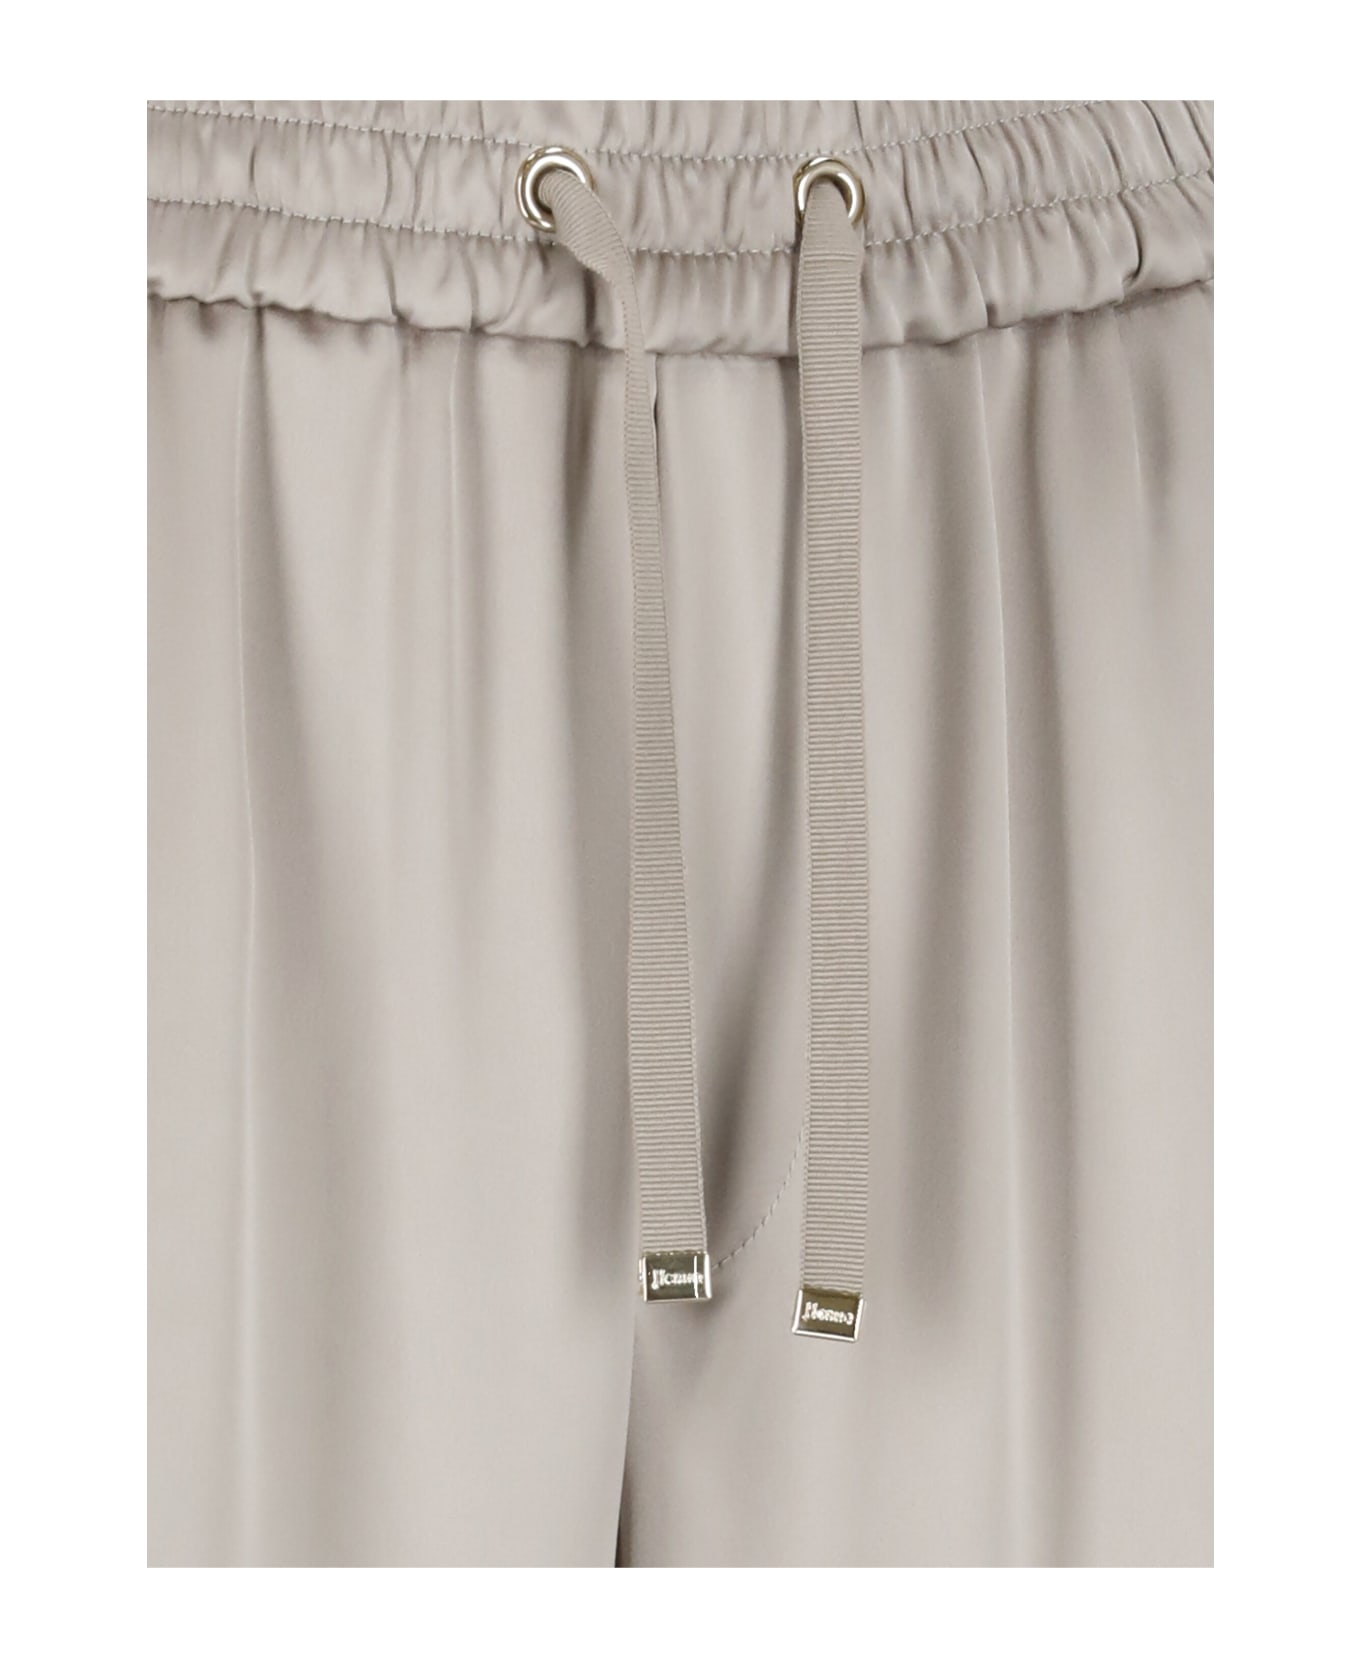 Herno Casual Satin Trousers - Cream